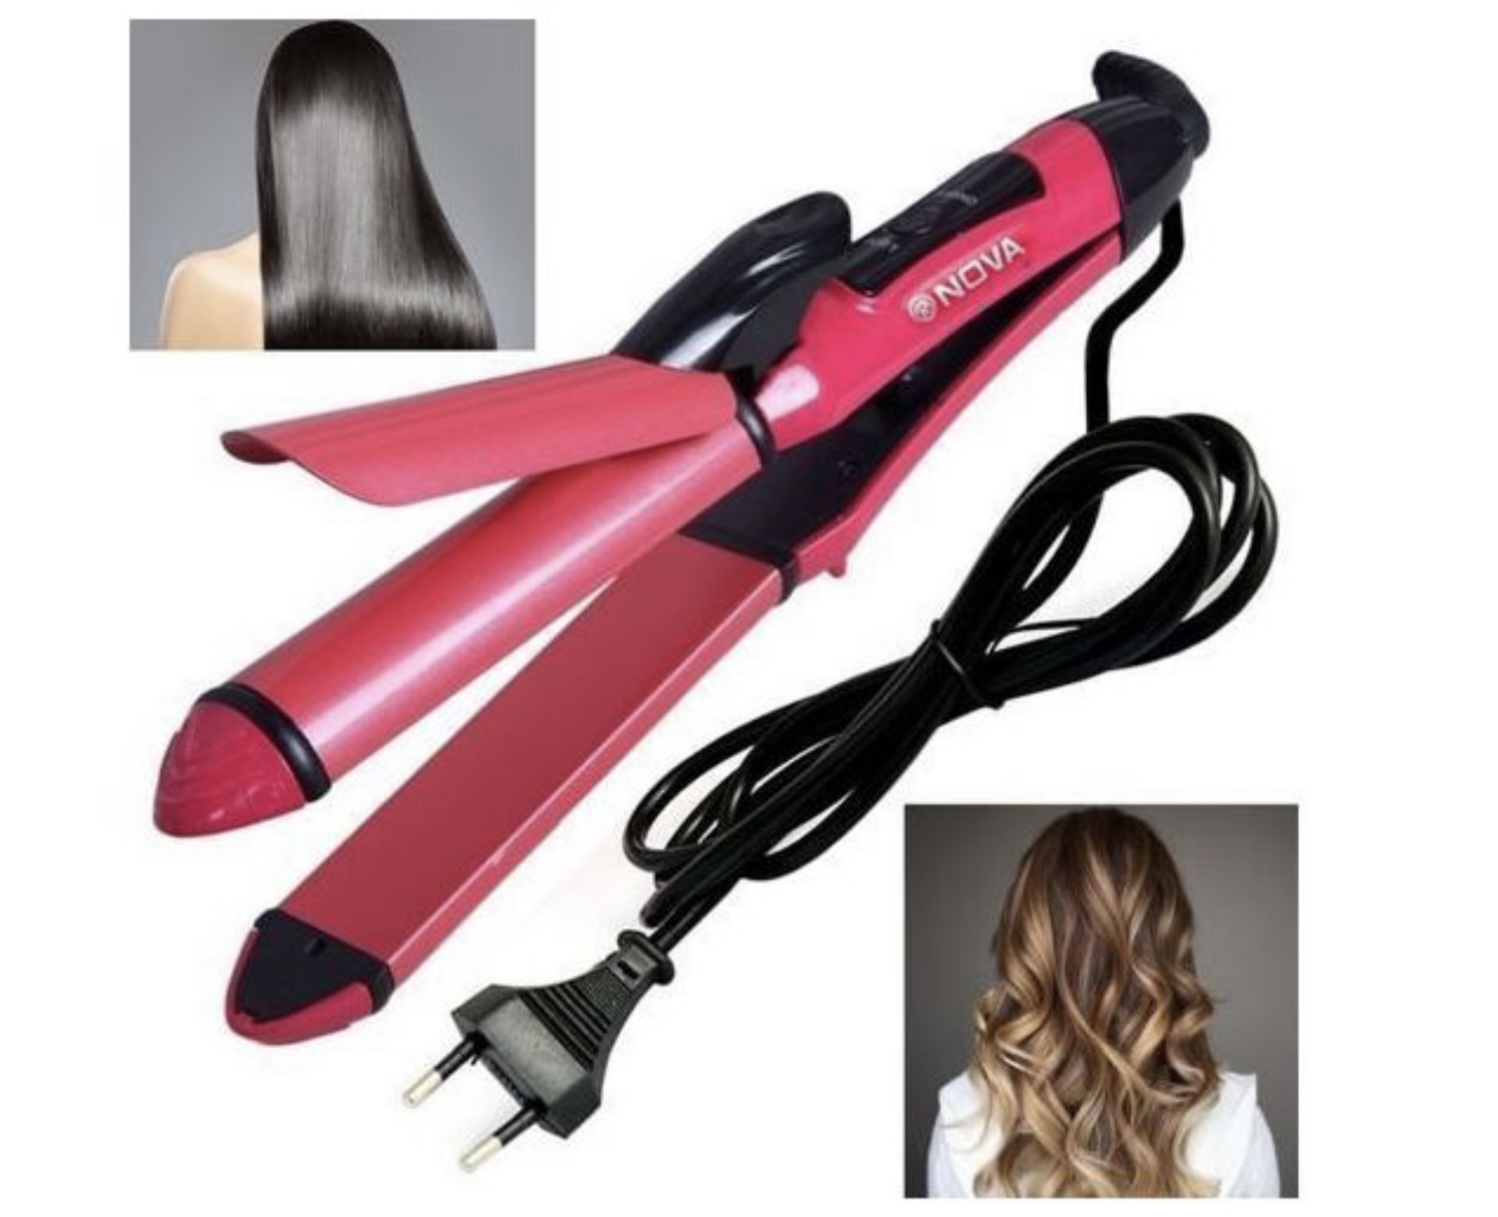 2in1 straightener and curler